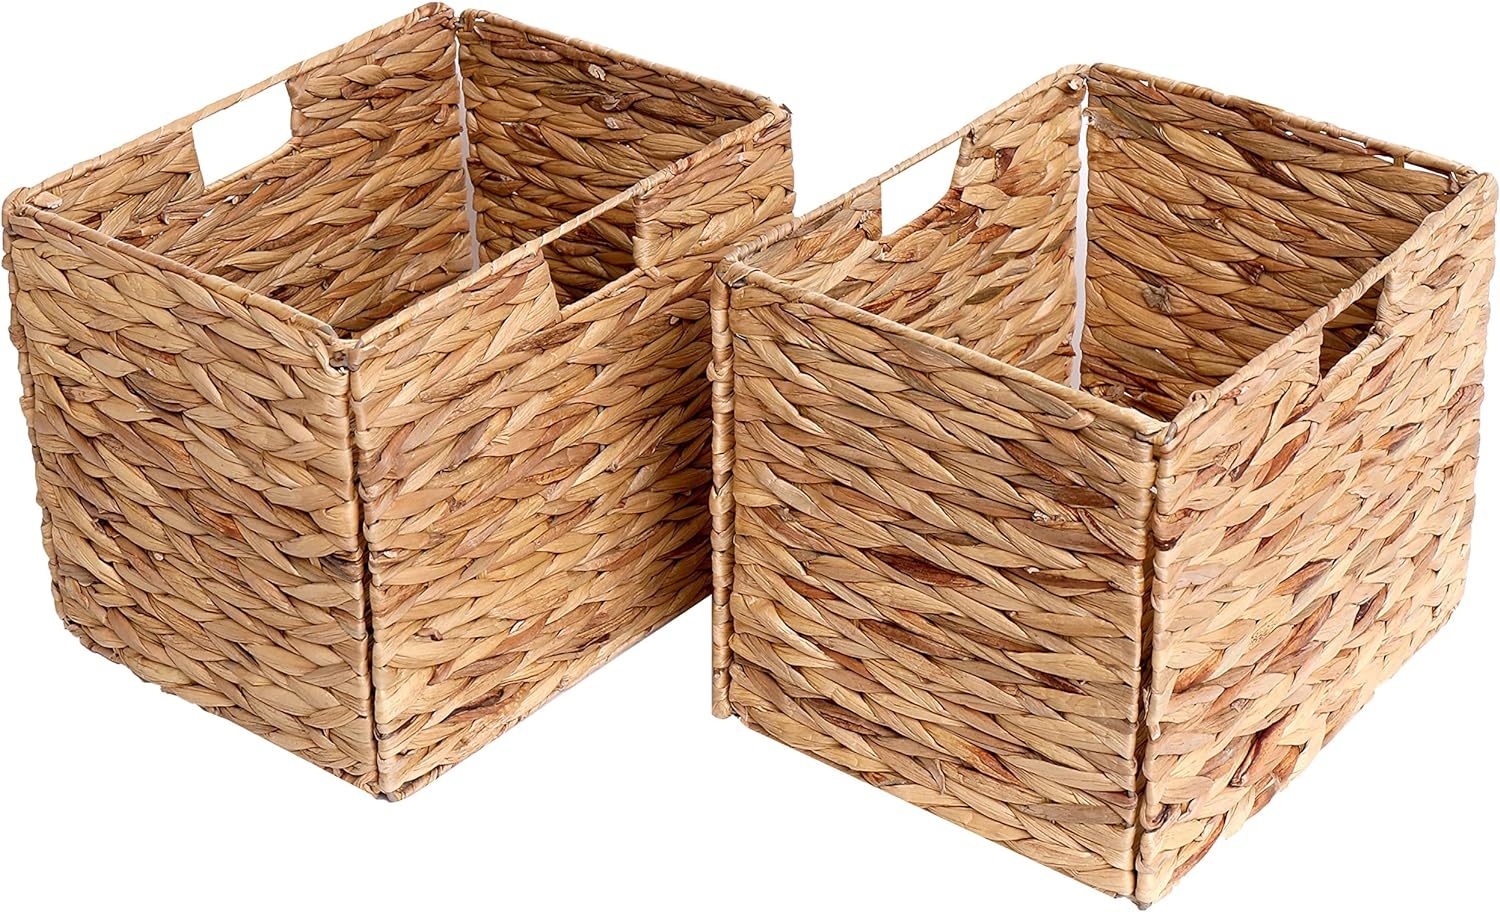 Wicker Baskets 13.6X11X11 Inches, Folding 2 Packs Handmade Woven, Seagrass - $56.93